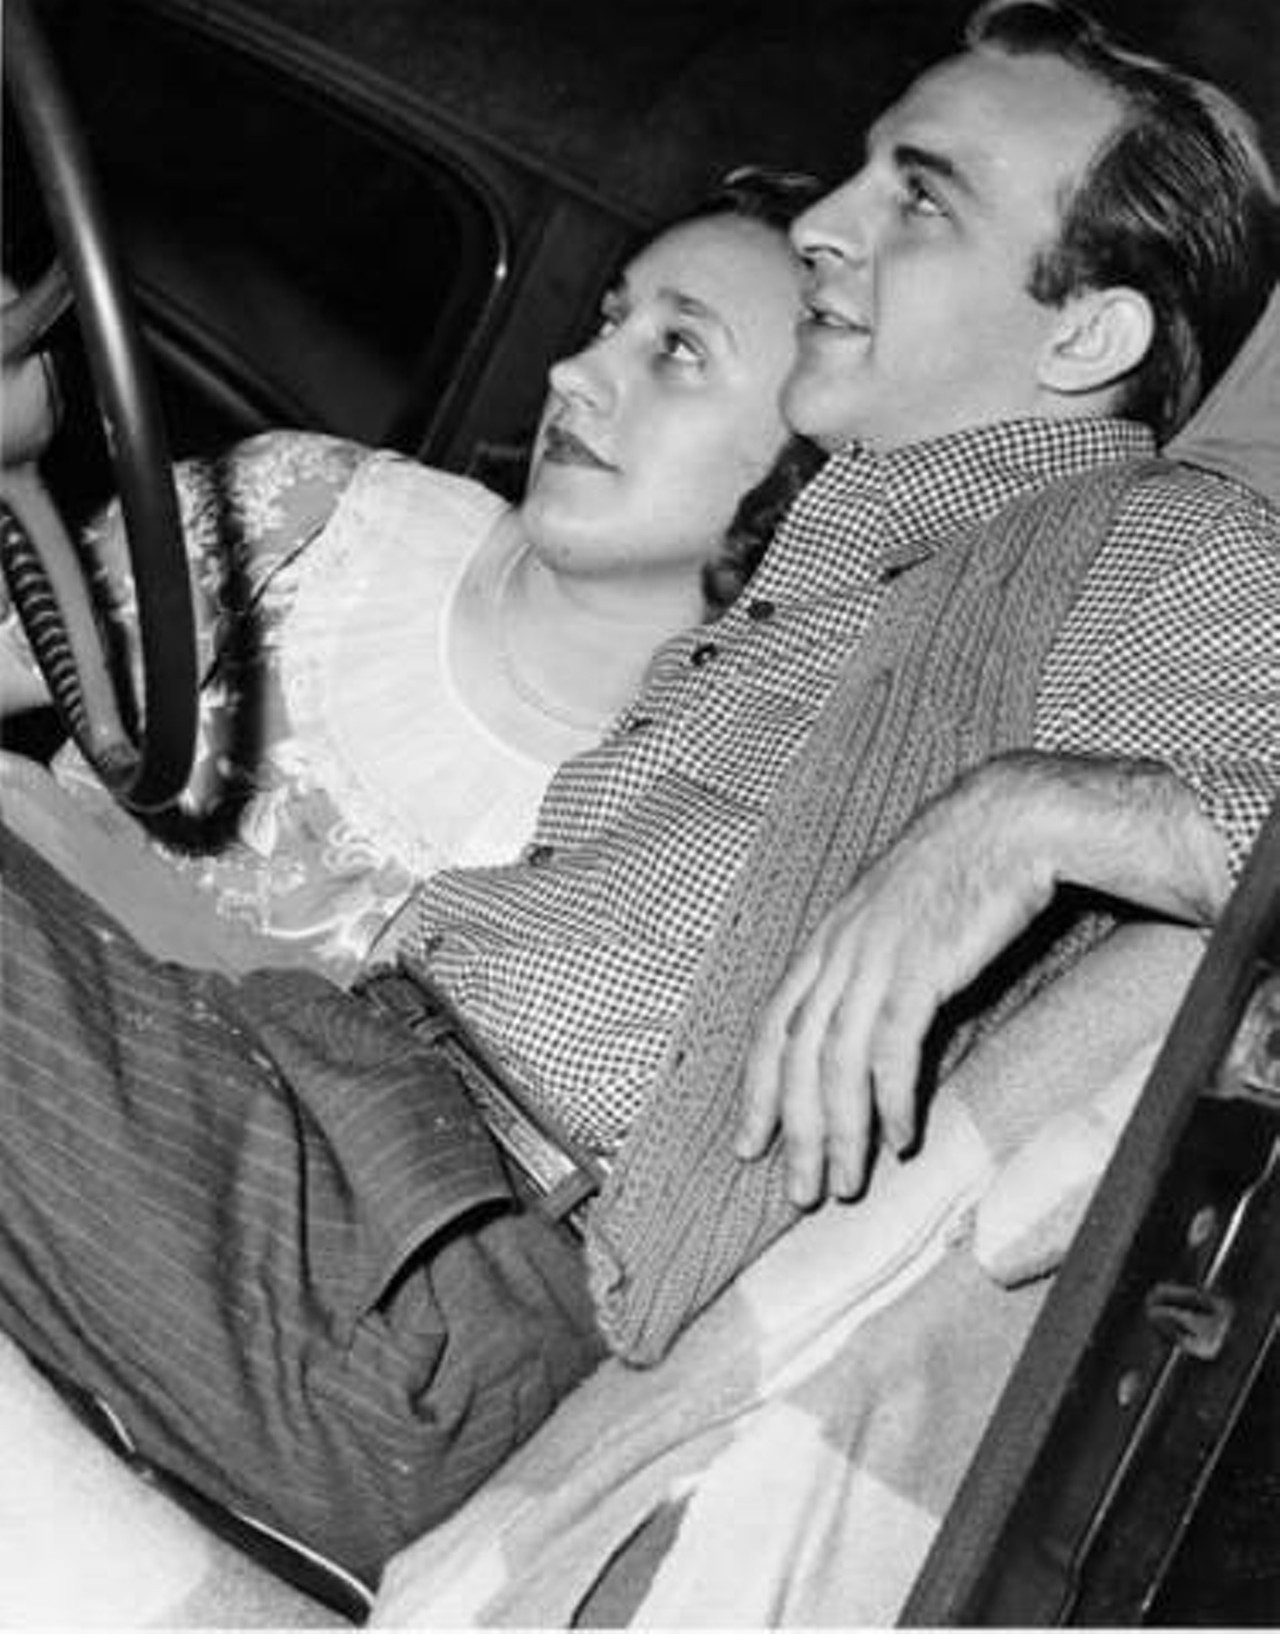 Dorothy Supu and Joe Carlowe at Drive-In Theater (Willoughby) - July 30, 1947